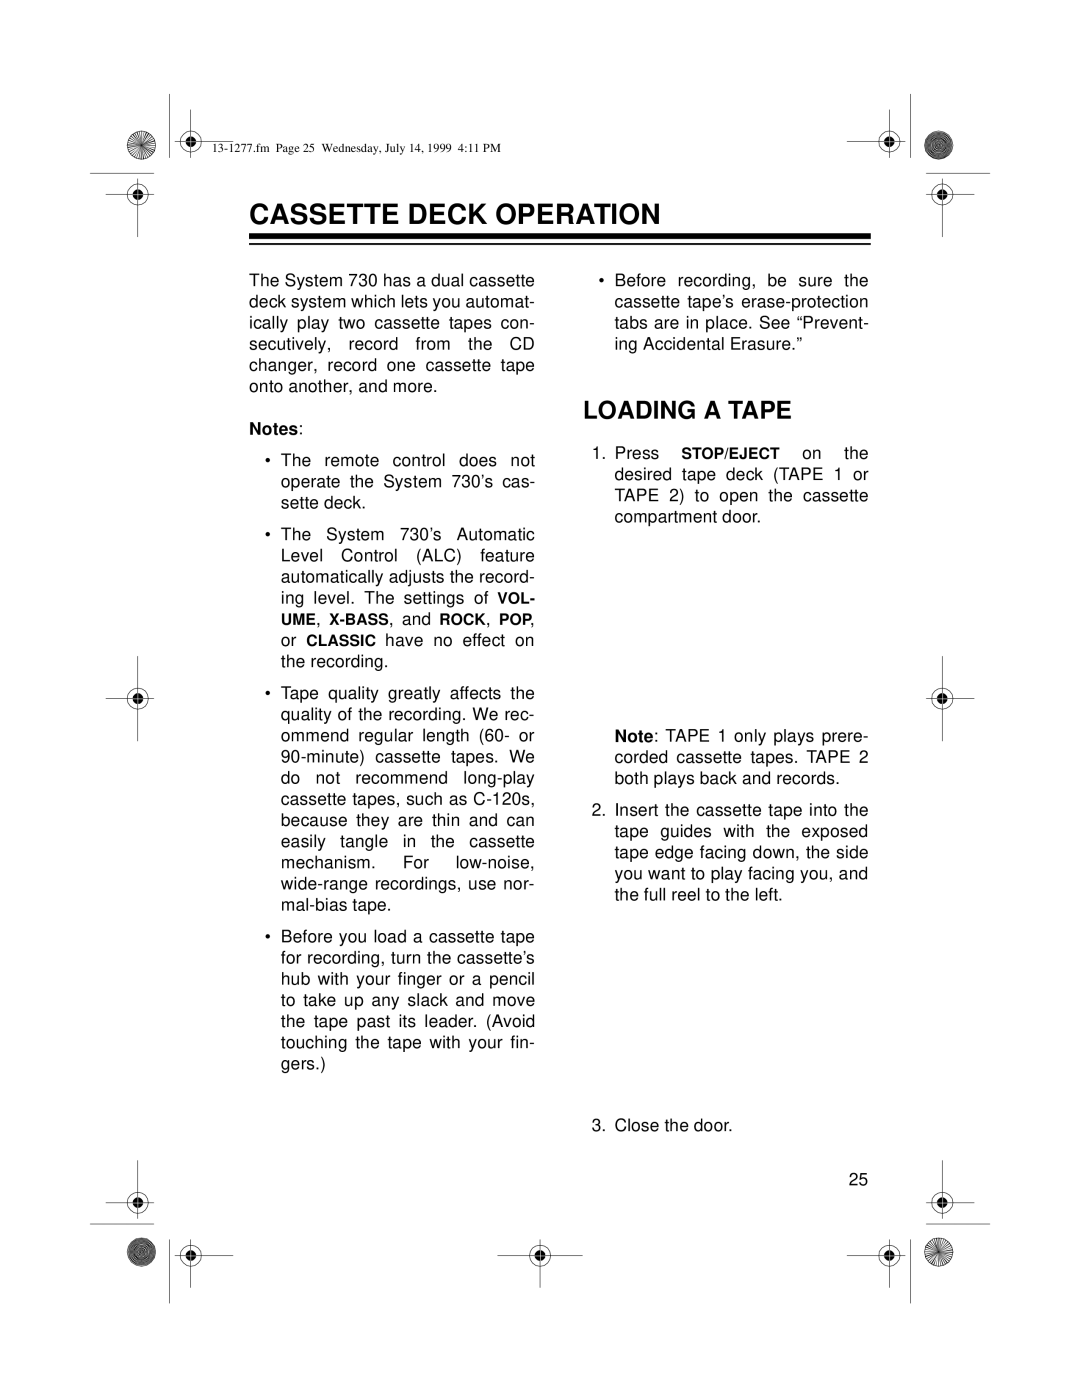 Optimus SYSTEM 730 owner manual Cassette Deck Operation, Loading A Tape 